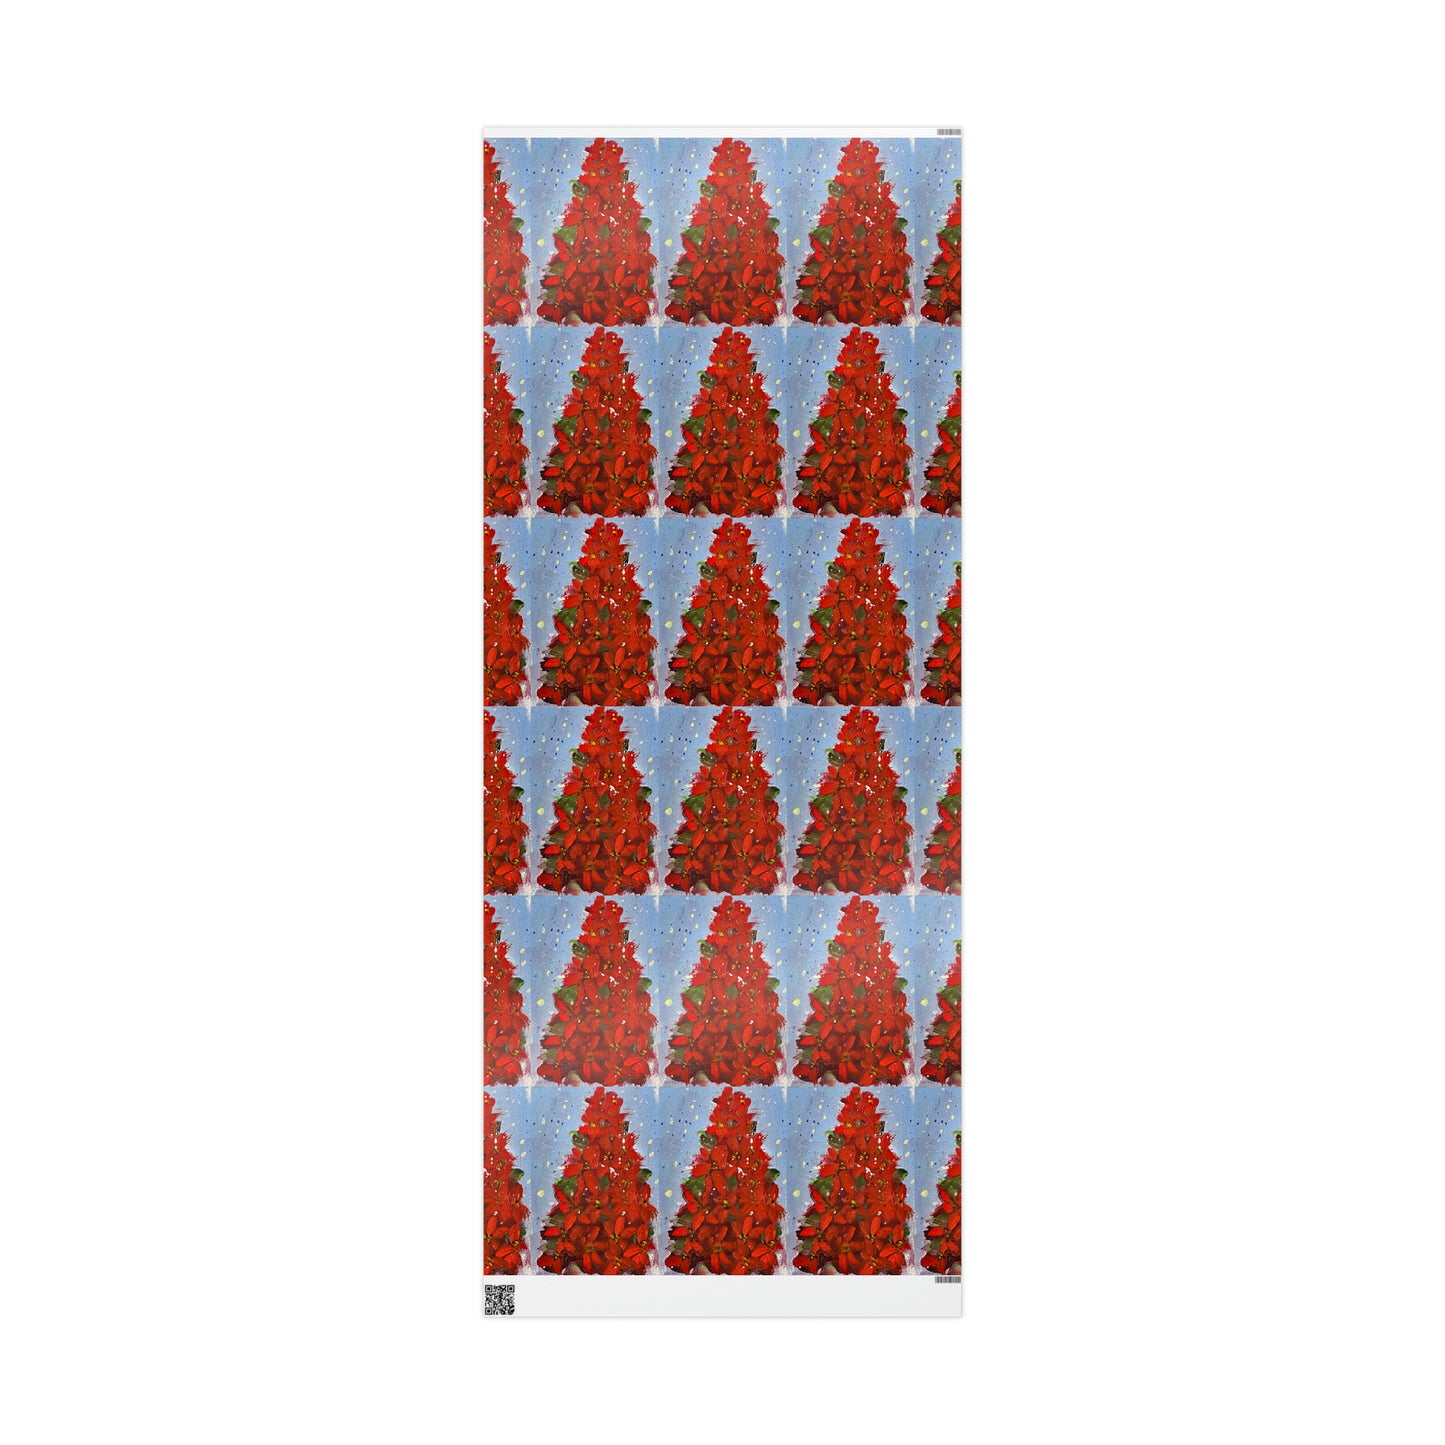 Poinsettia Tree (3 Sizes) Wrapping Papers